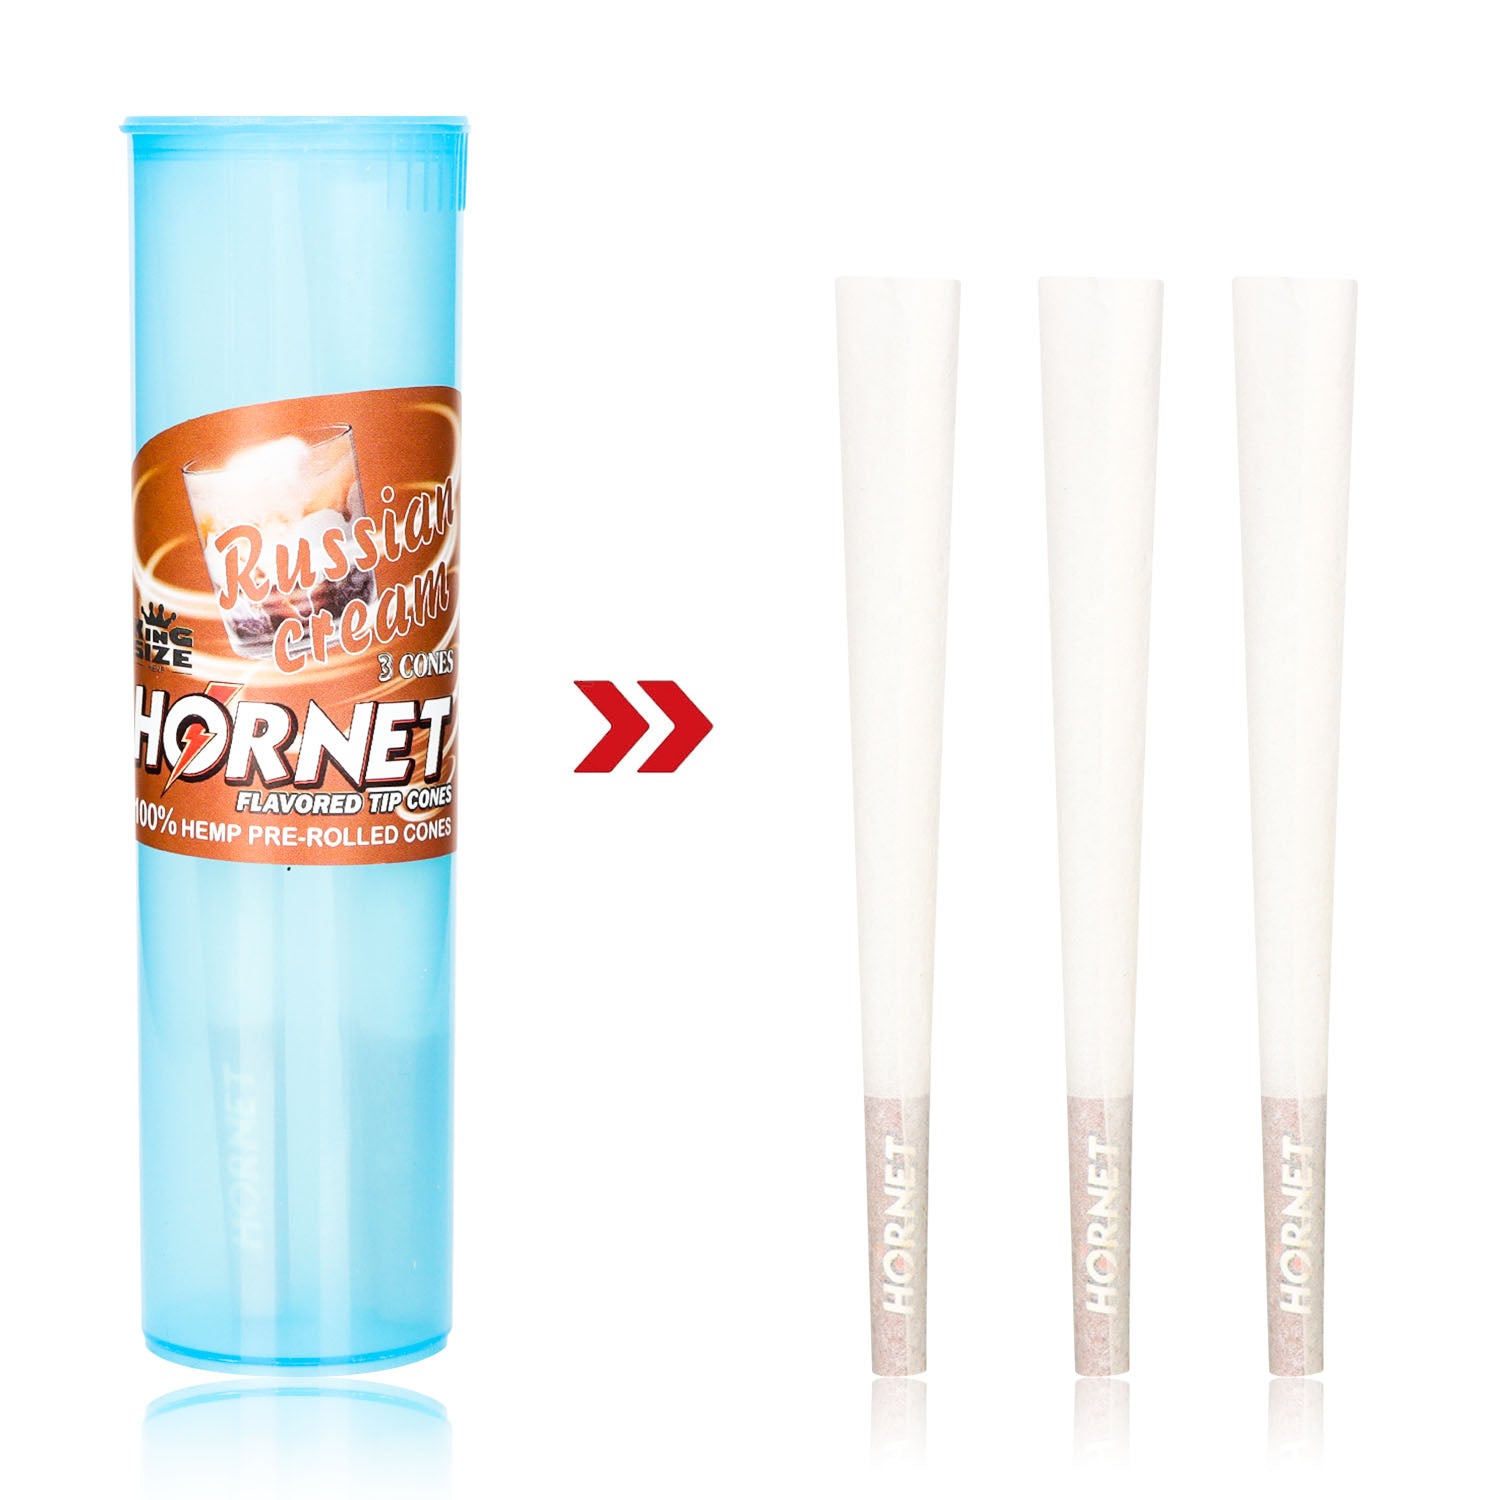 HORNET Cream Flavors Pre Rolled Cones, King Size Pre Rolled Rolling Paper With Tips, Slow Burning Rolling Cones & Flavored Pop, 3 PCS / Tube, 12 Tubes / Box